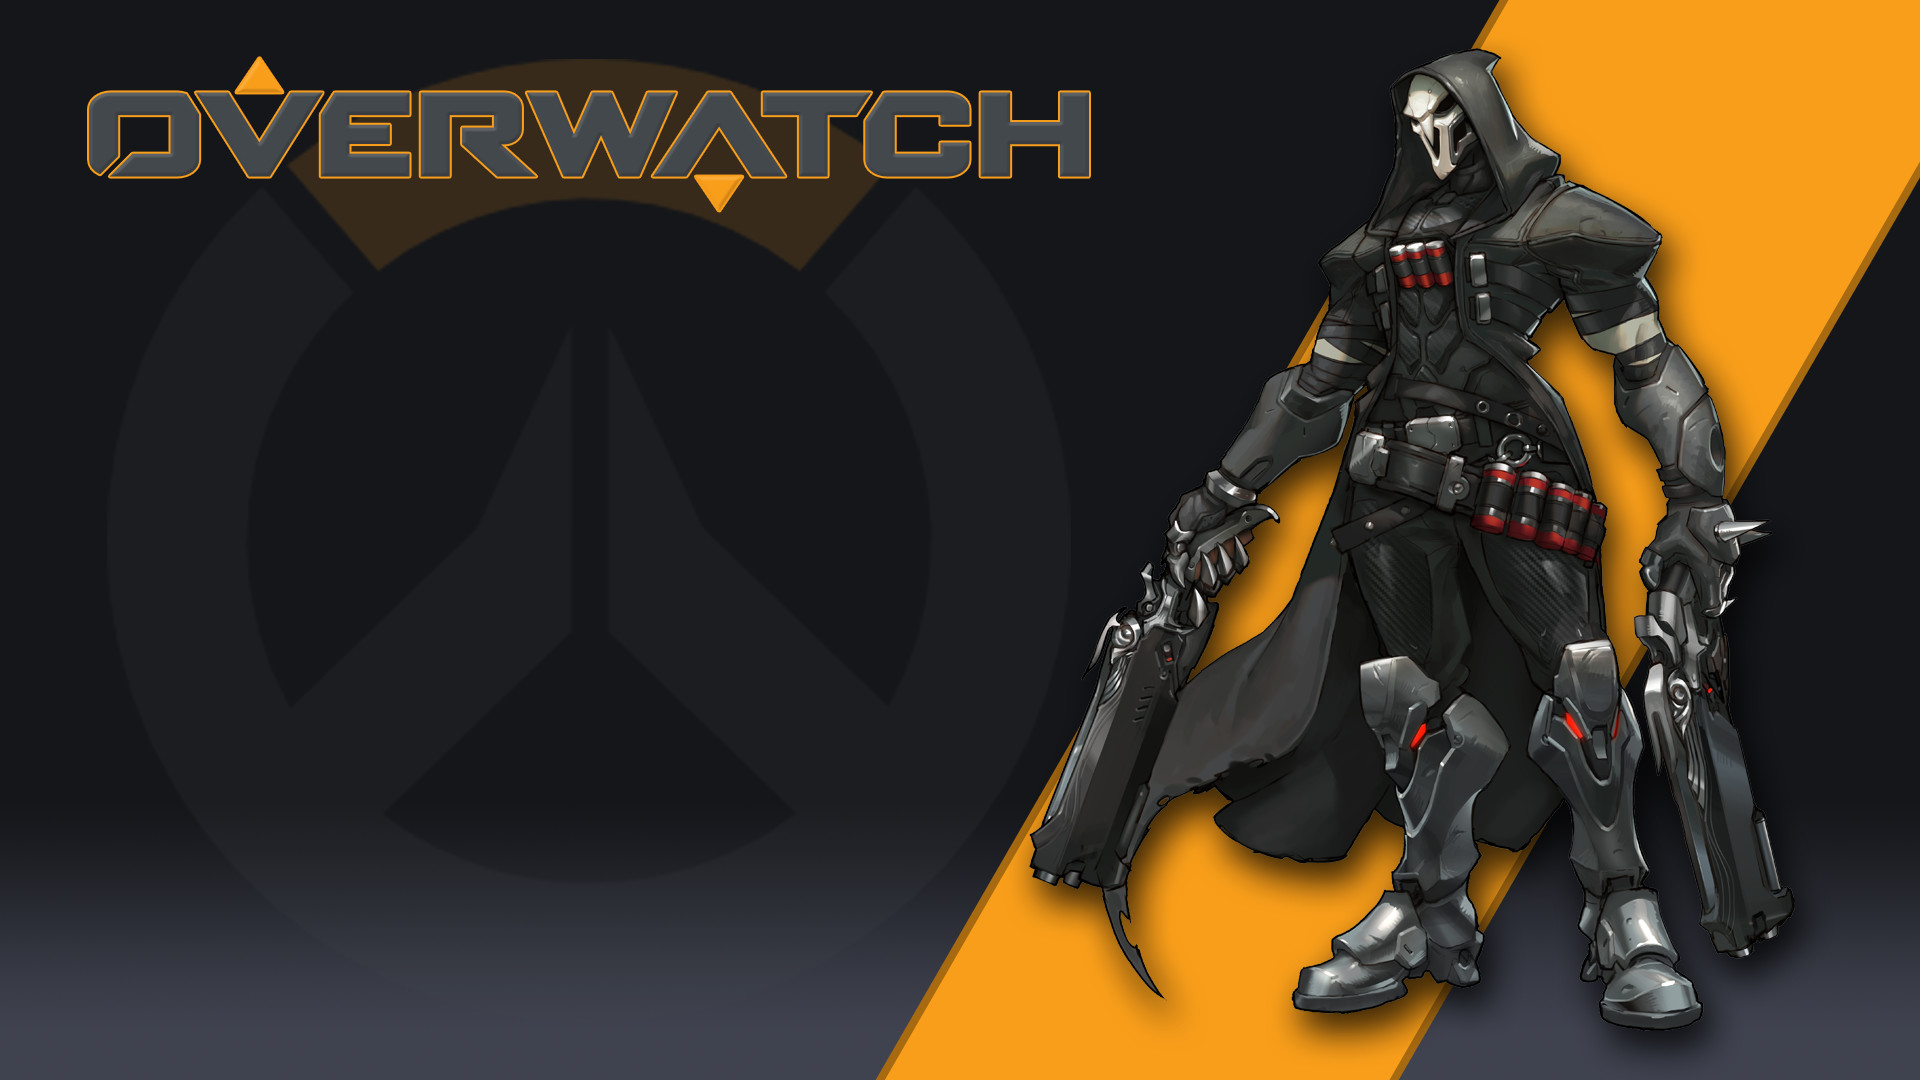 1920x1080 Overwatch Reaper Wallpaper by mikeyxpat Overwatch Reaper Wallpaper by  mikeyxpat